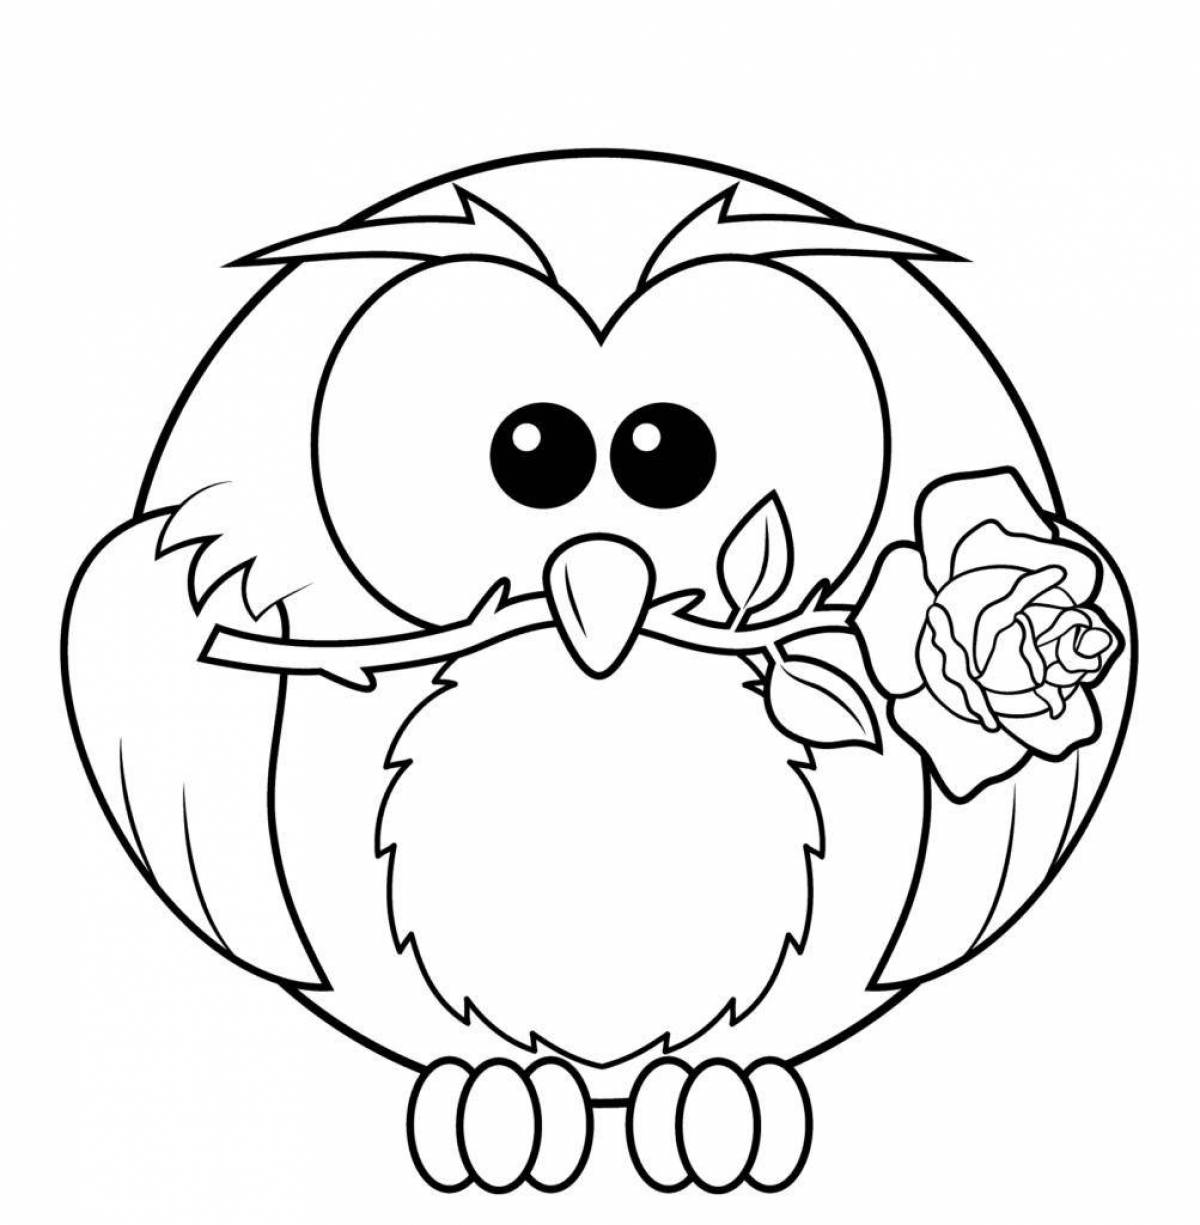 Imaginary owl coloring page